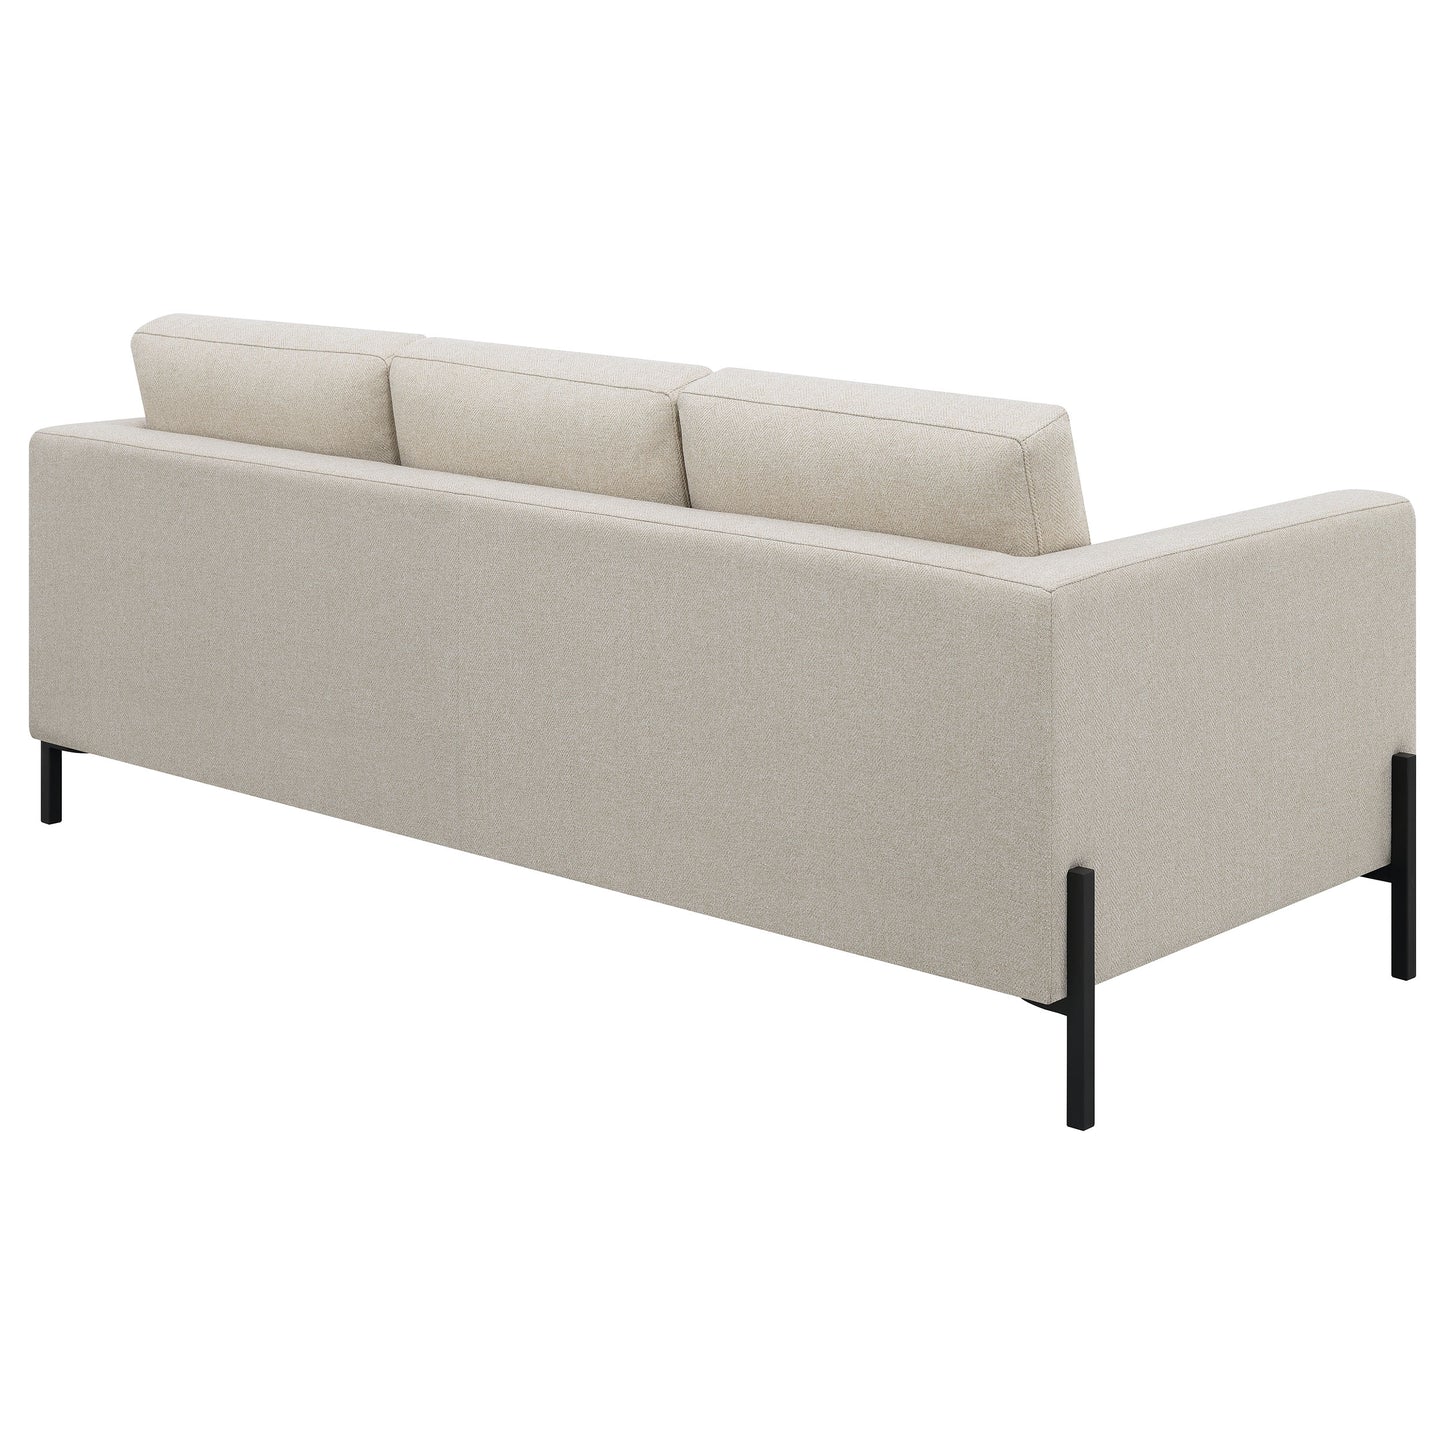 Tilly Upholstered Track Arms Sofa Oatmeal